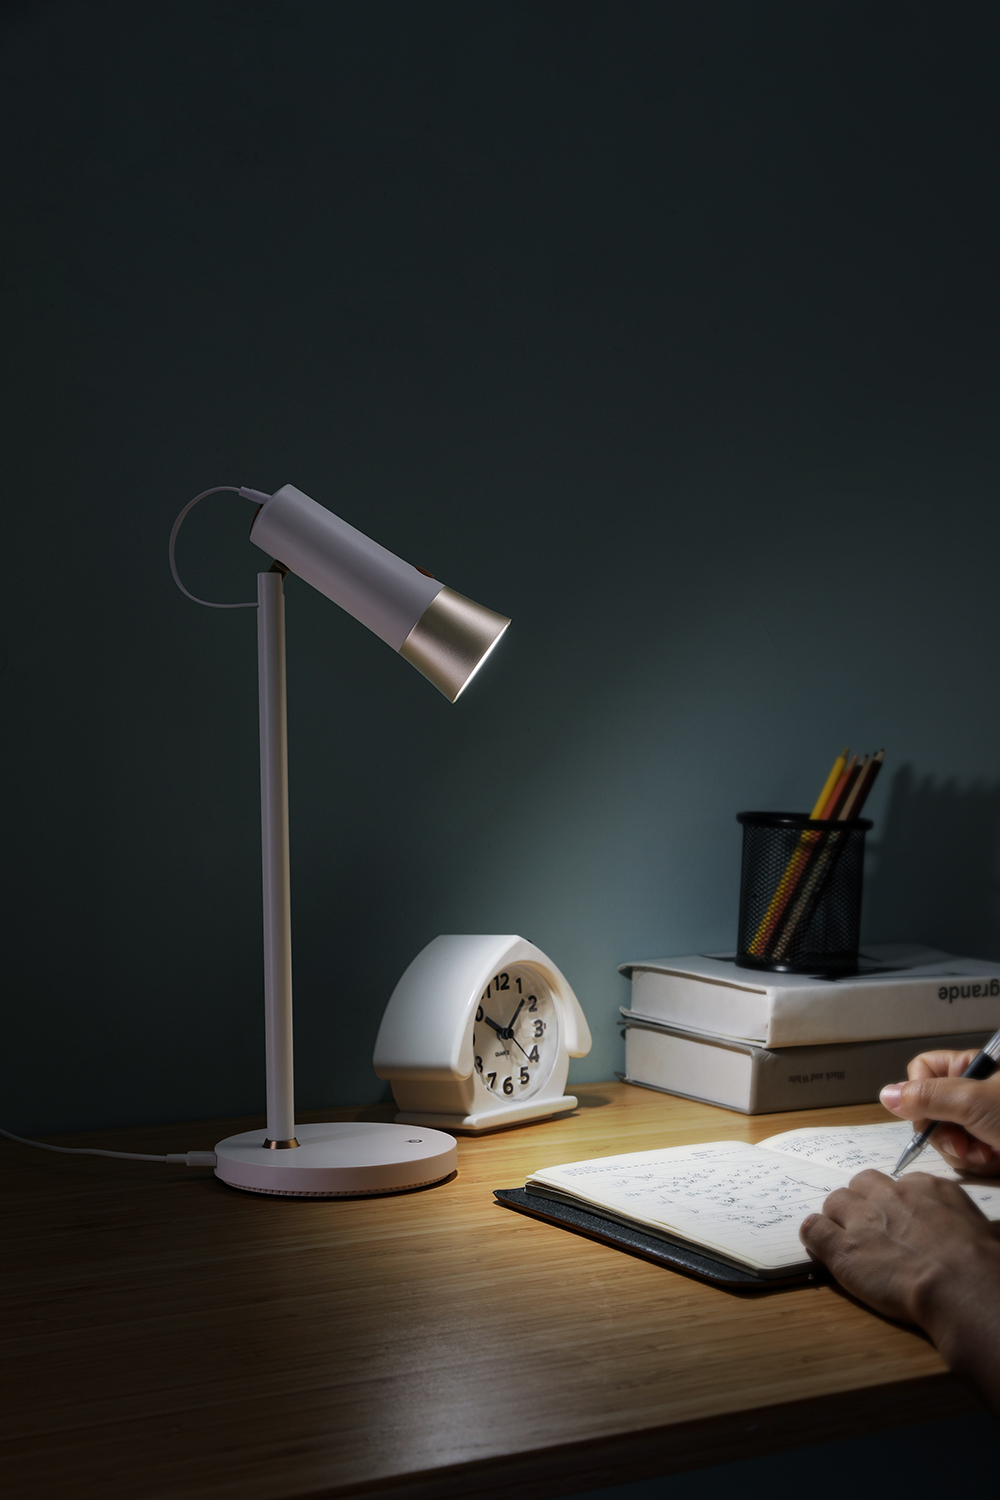 WILIT-F3D-Portable-300LM-LED-Desk-Lamp-With-Torch-Function-Built-in-18650-37V2200mAh-Lithium-Battery-1947422-1